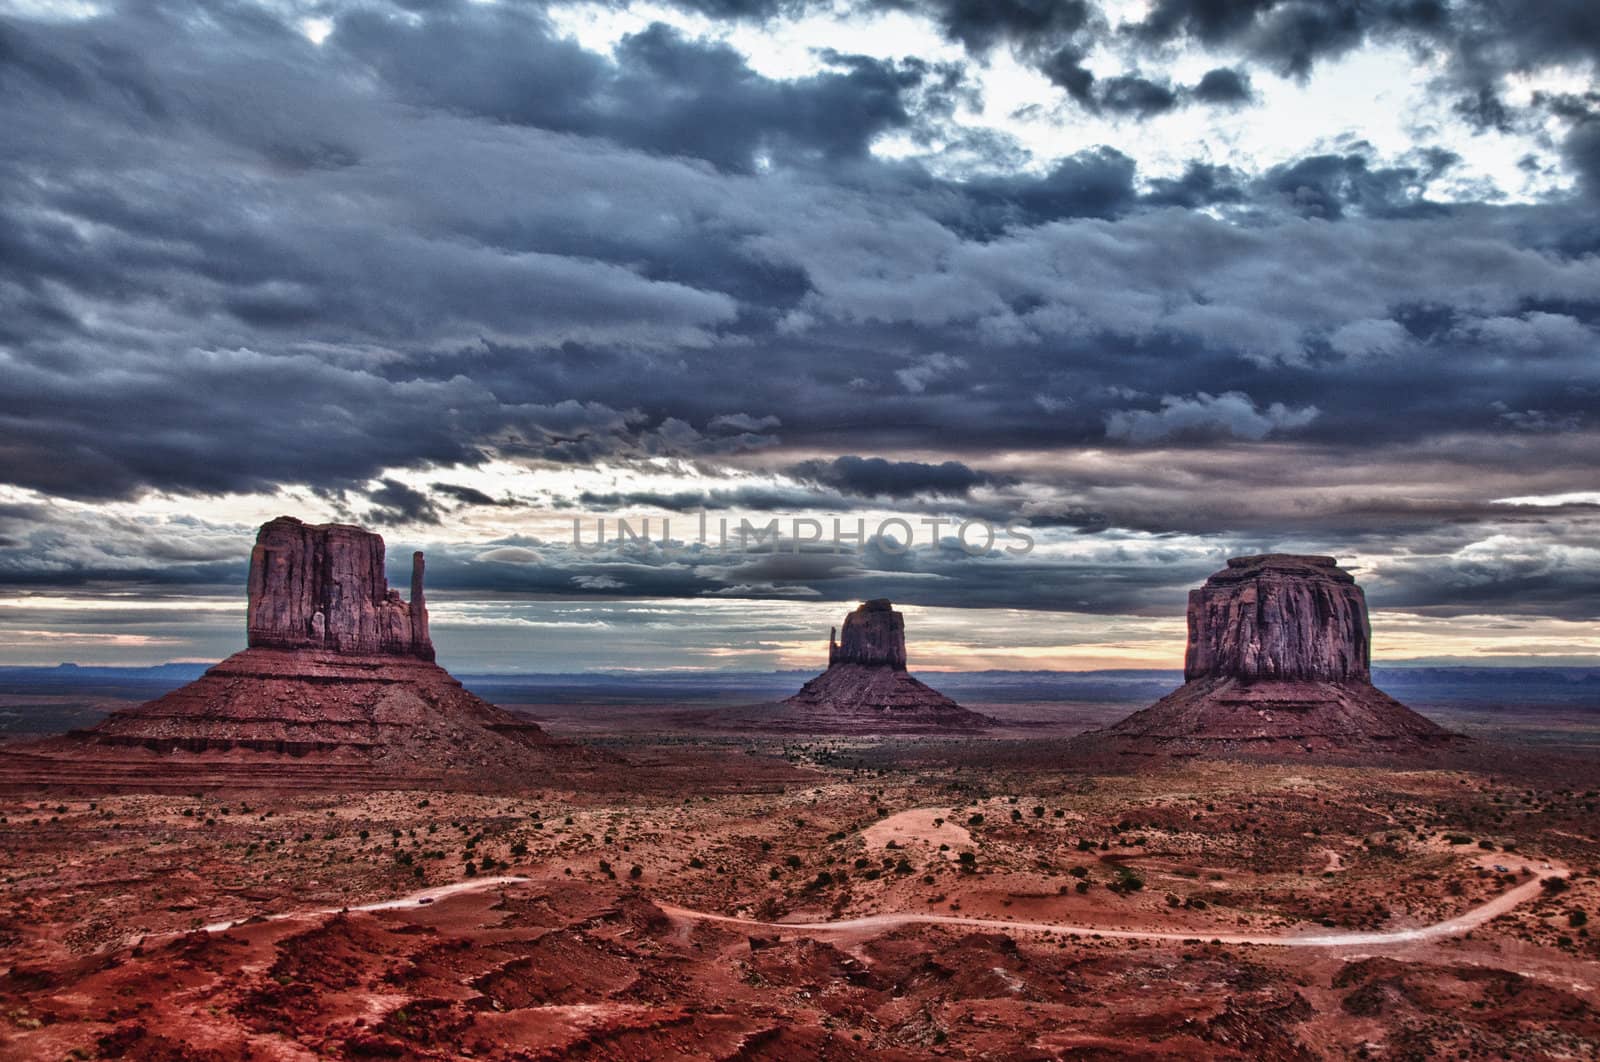 Monument valley cloudy colorful sunrise landscape view, USA